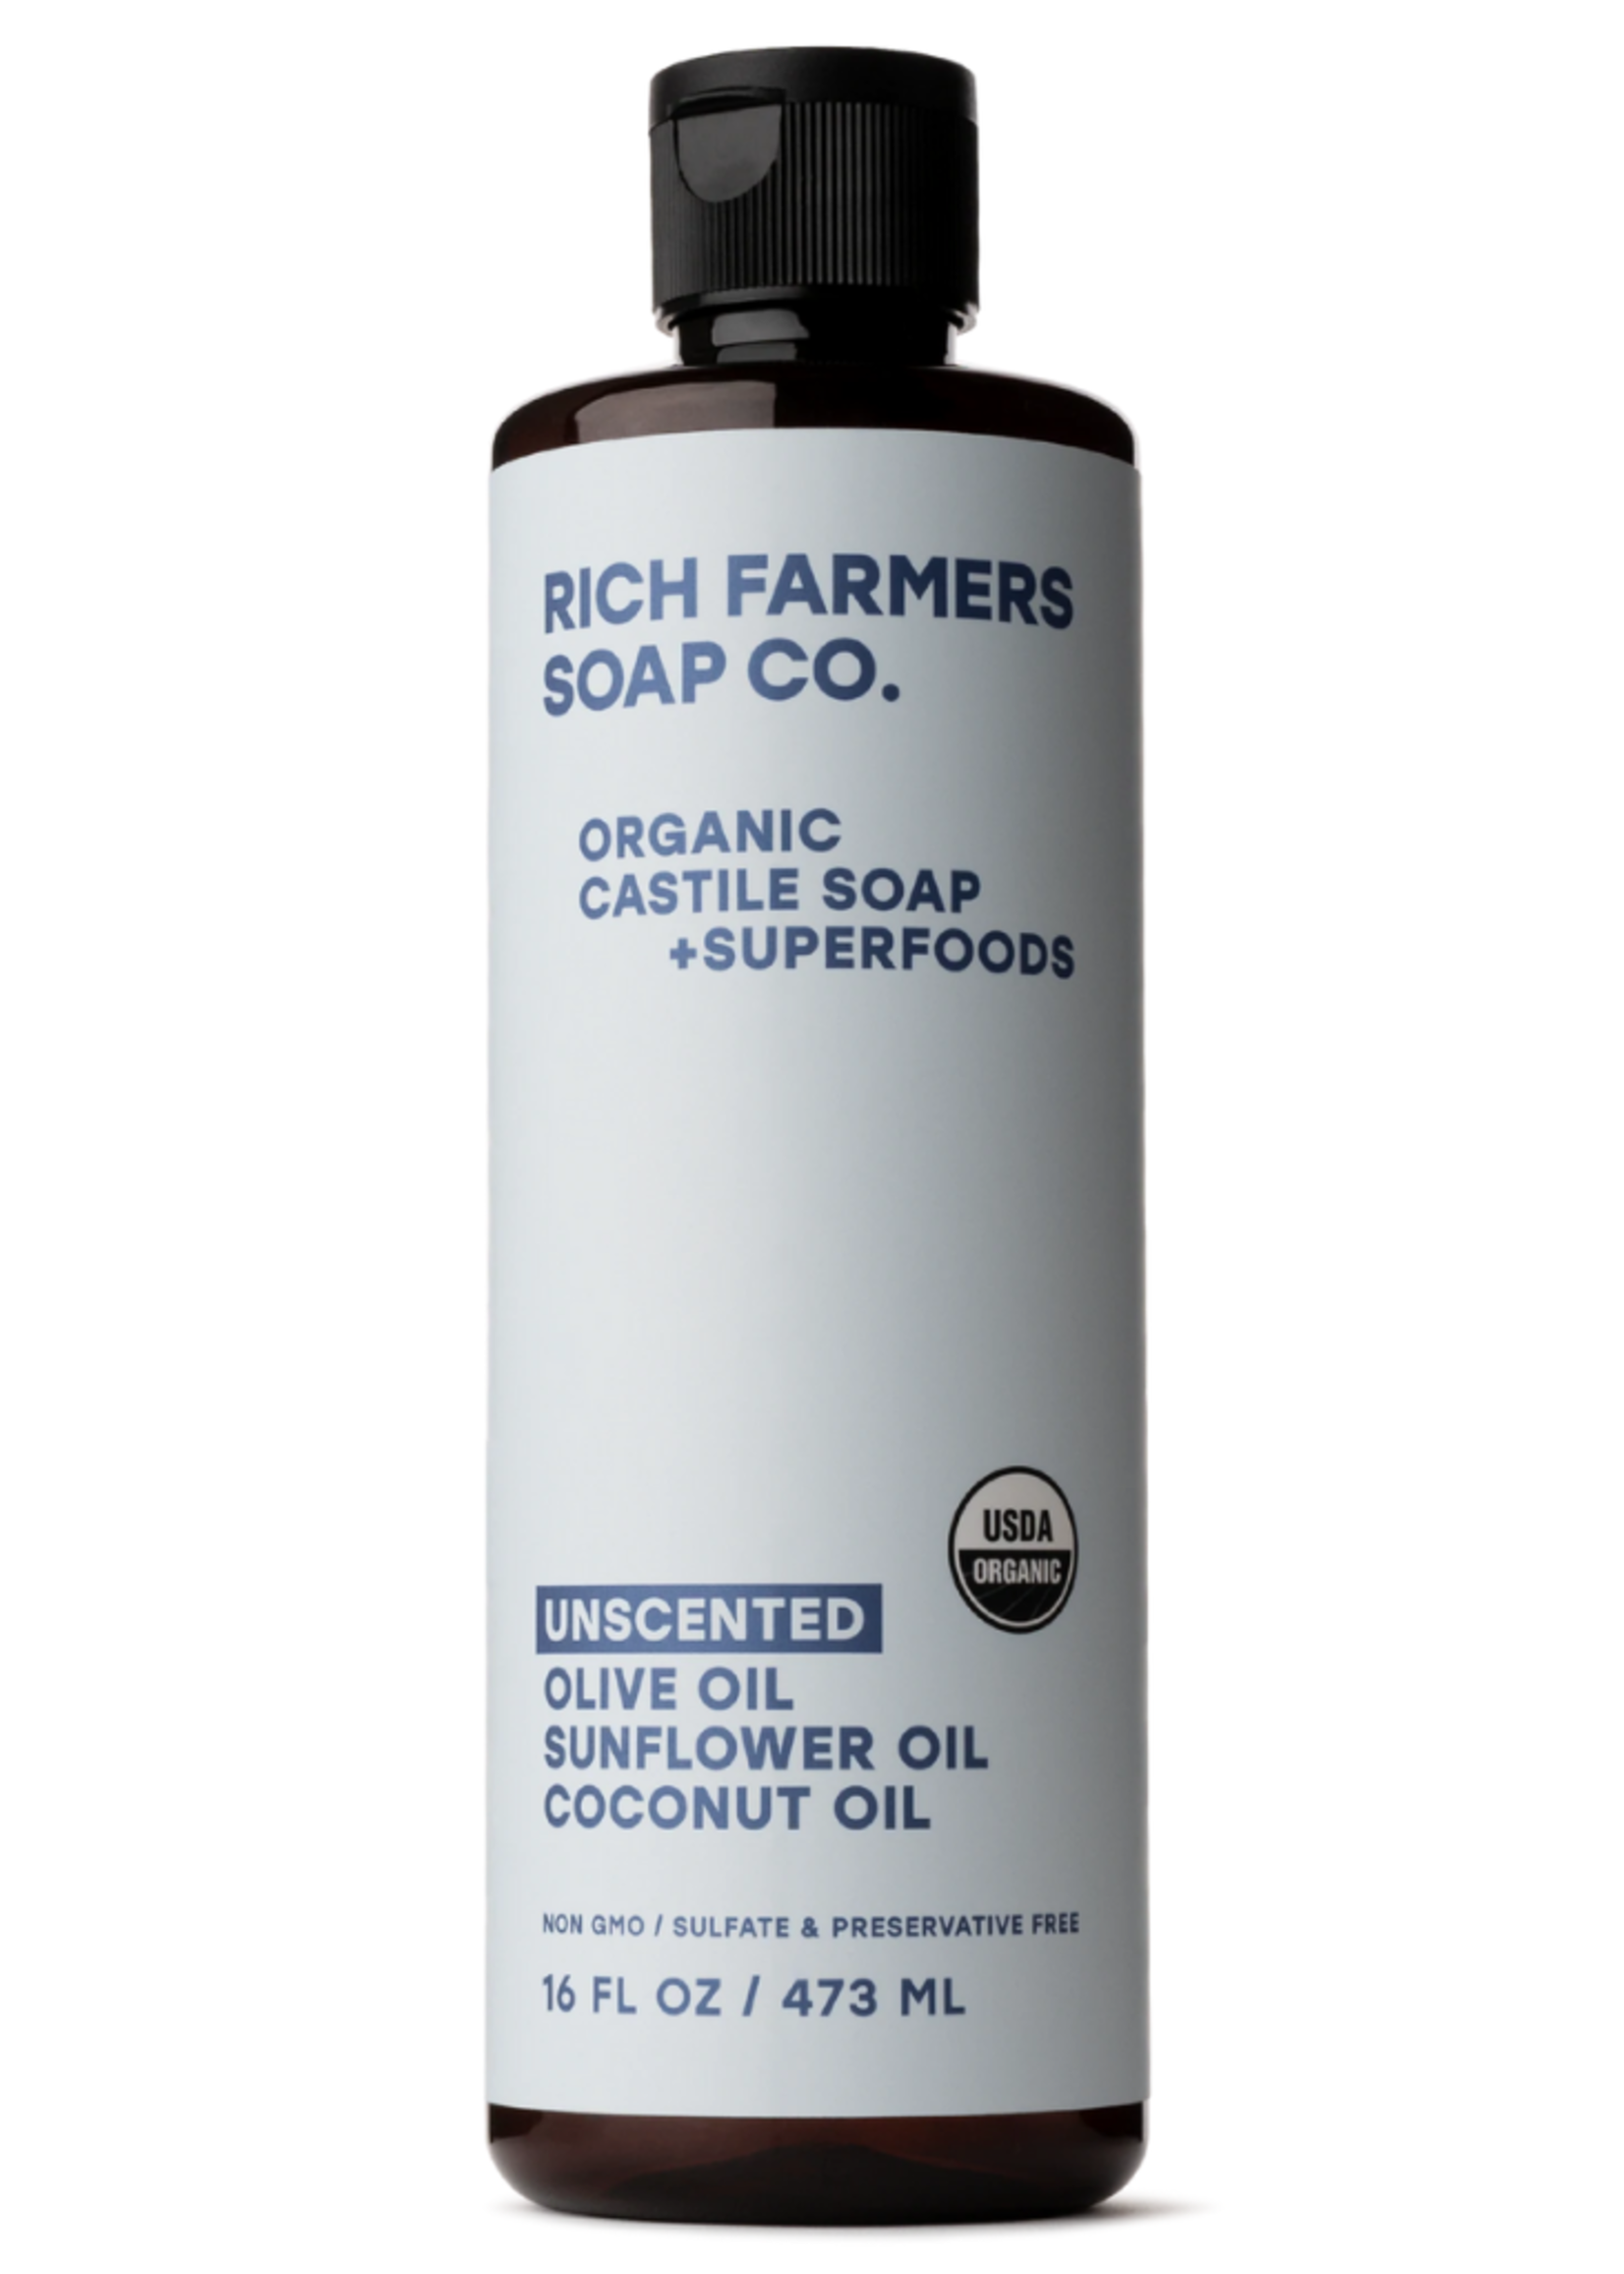 Rich Farmers Soap Co. Unscented